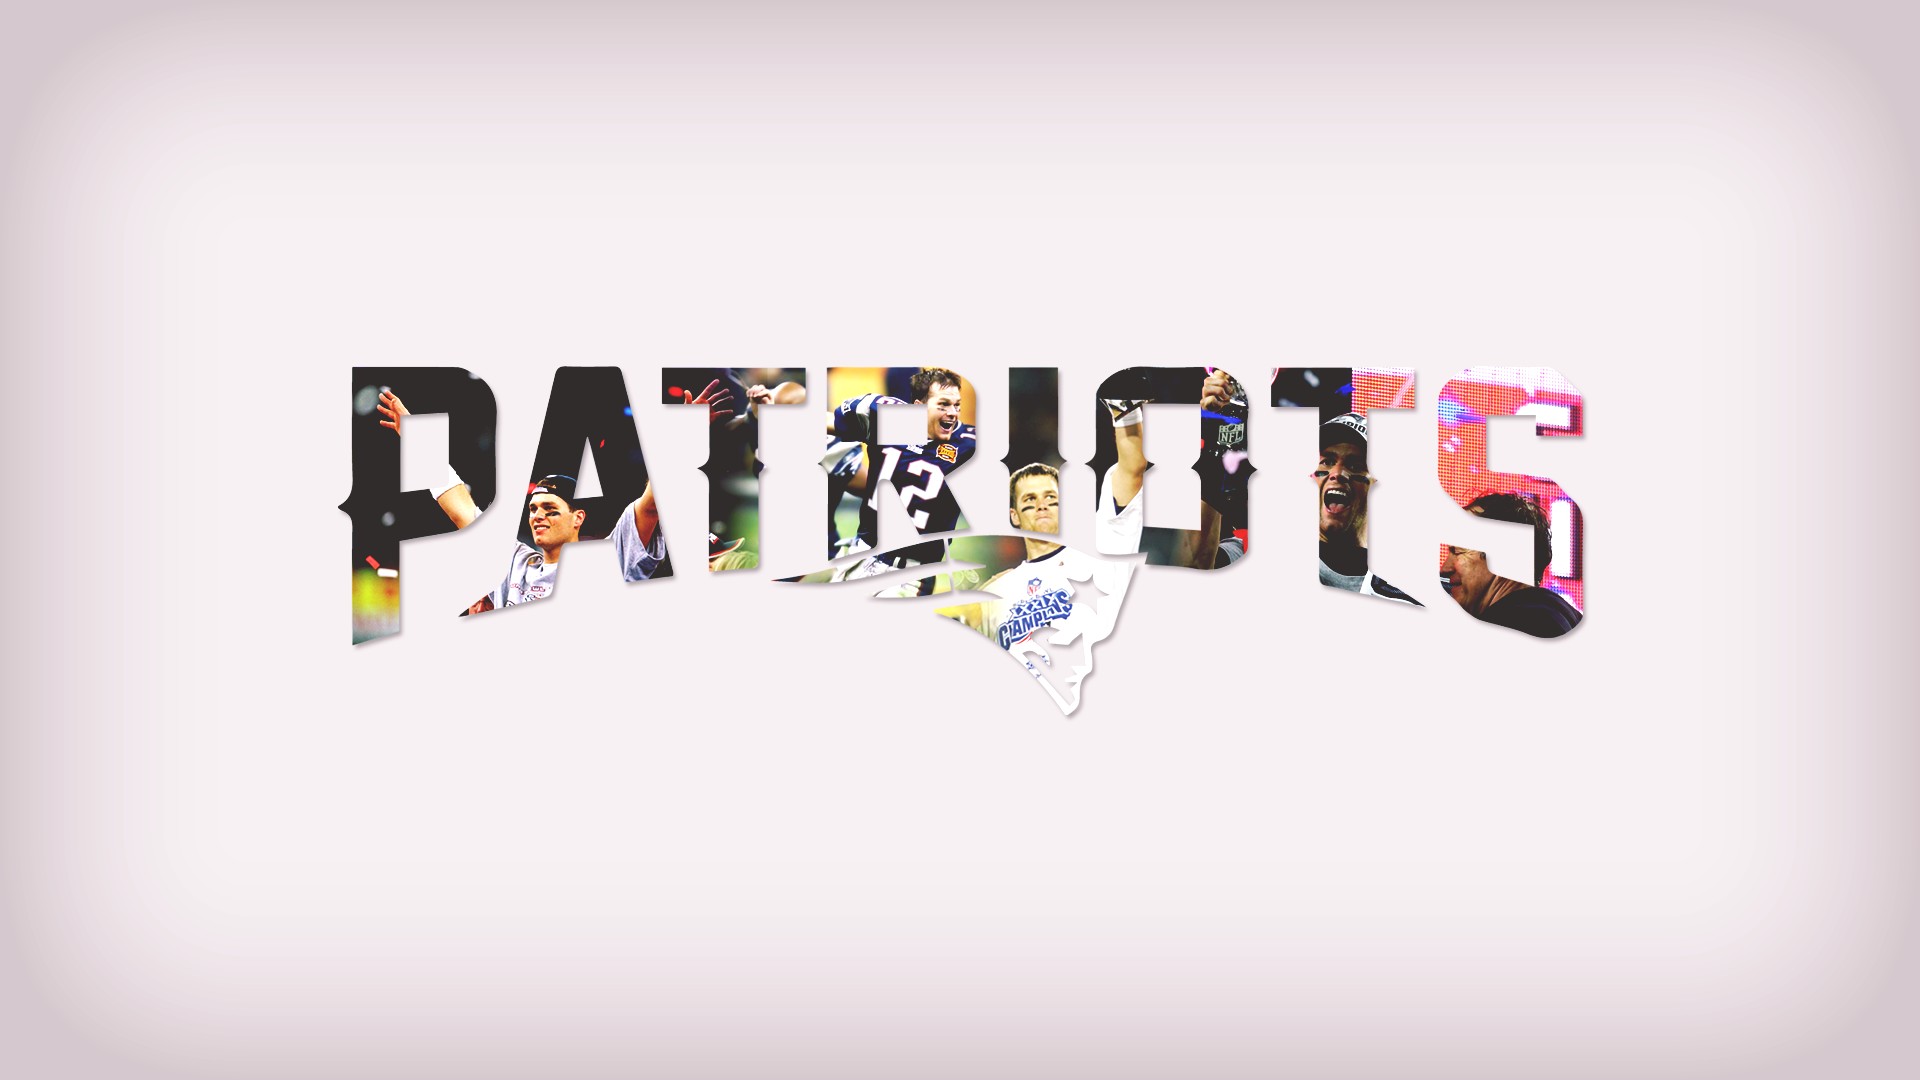 HD Patriots Wallpapers With Resolution 1920X1080 pixel. You can make this wallpaper for your Mac or Windows Desktop Background, iPhone, Android or Tablet and another Smartphone device for free